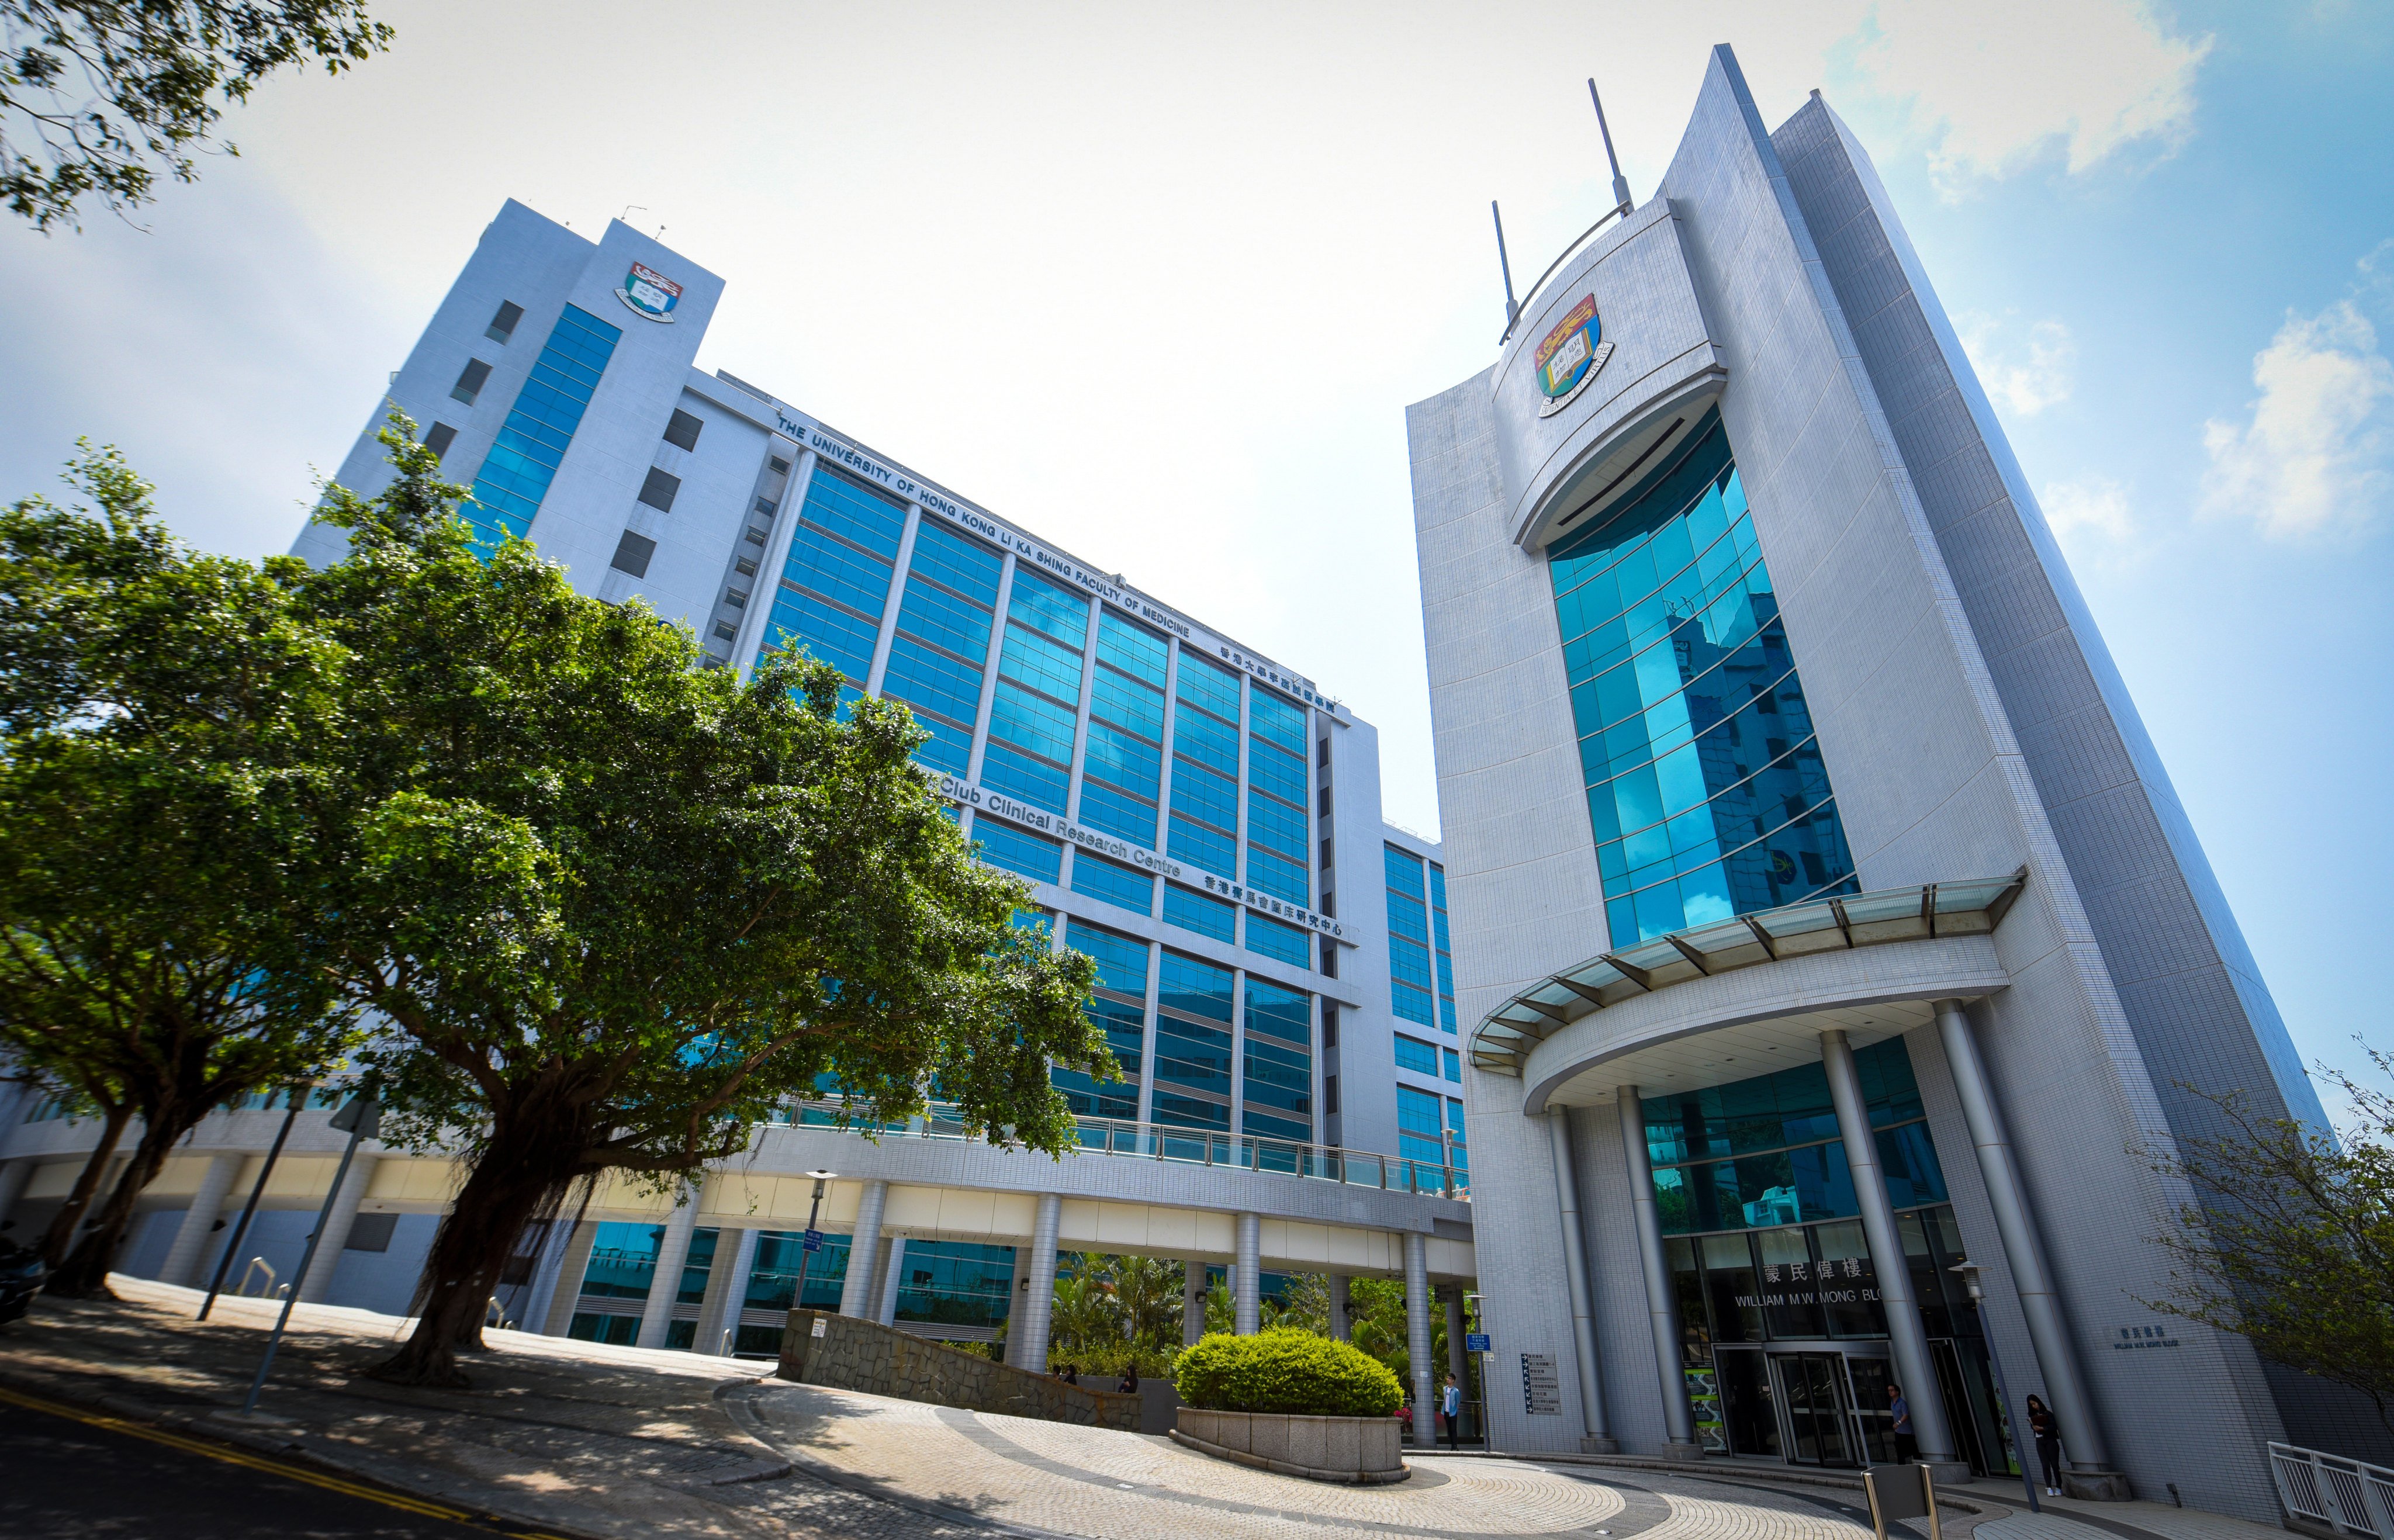 The Li Ka Shing faculty of medicine at the University of Hong Kong. The unit cost for medical and dental students is more than double that for those studying non-laboratory disciplines. Photo: SCMP